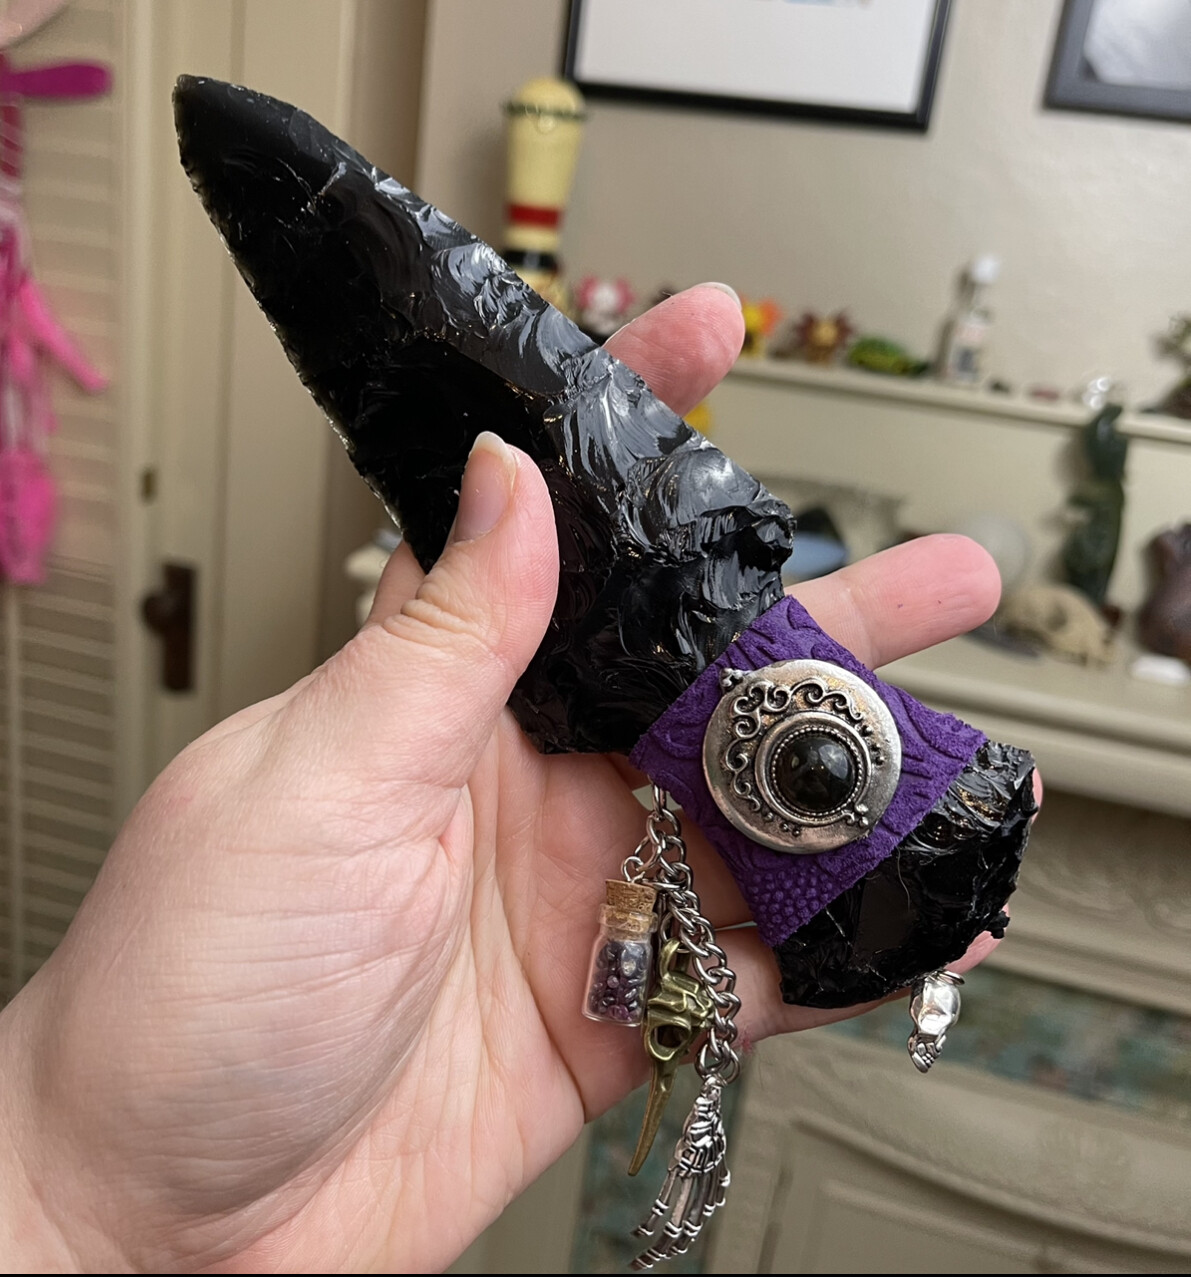 8-inch Knapped Obsidian Dagger (Inspired by the character Caligo Tenebris from Mercy's Light)